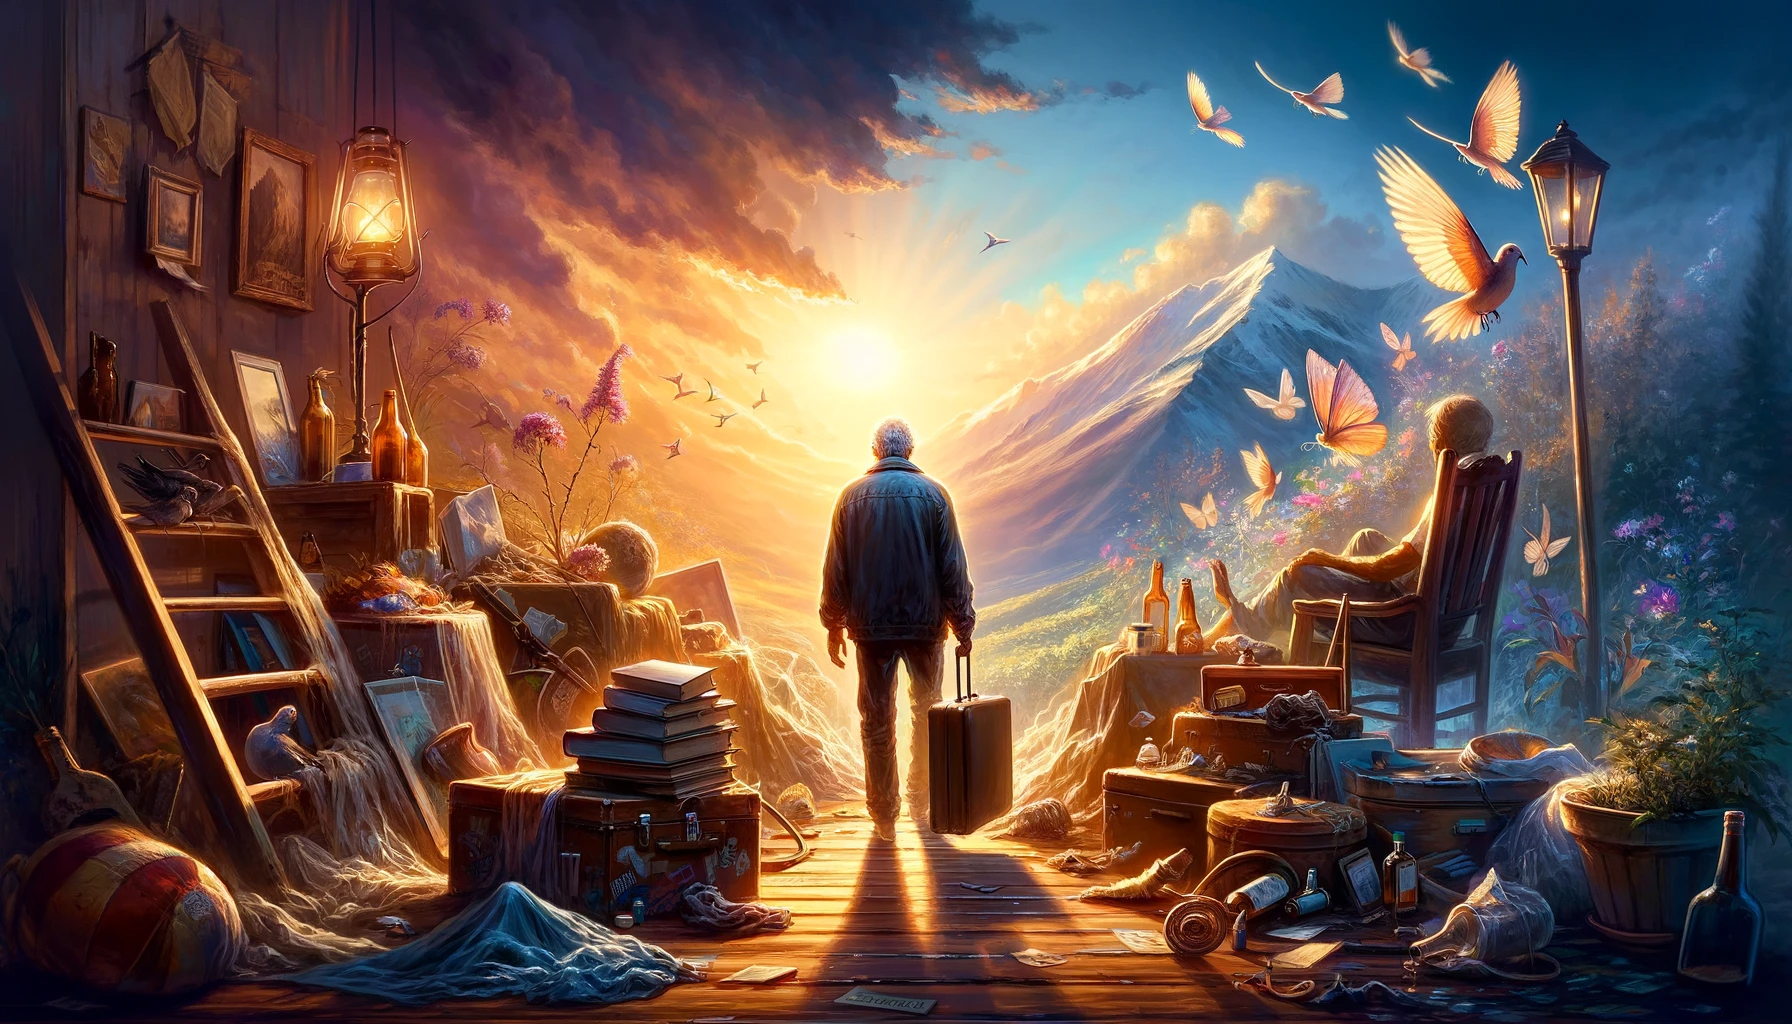 An image that vividly portrays the journey of learning and personal growth in recovery. The scene should depict an inspiring and transformative atmosp